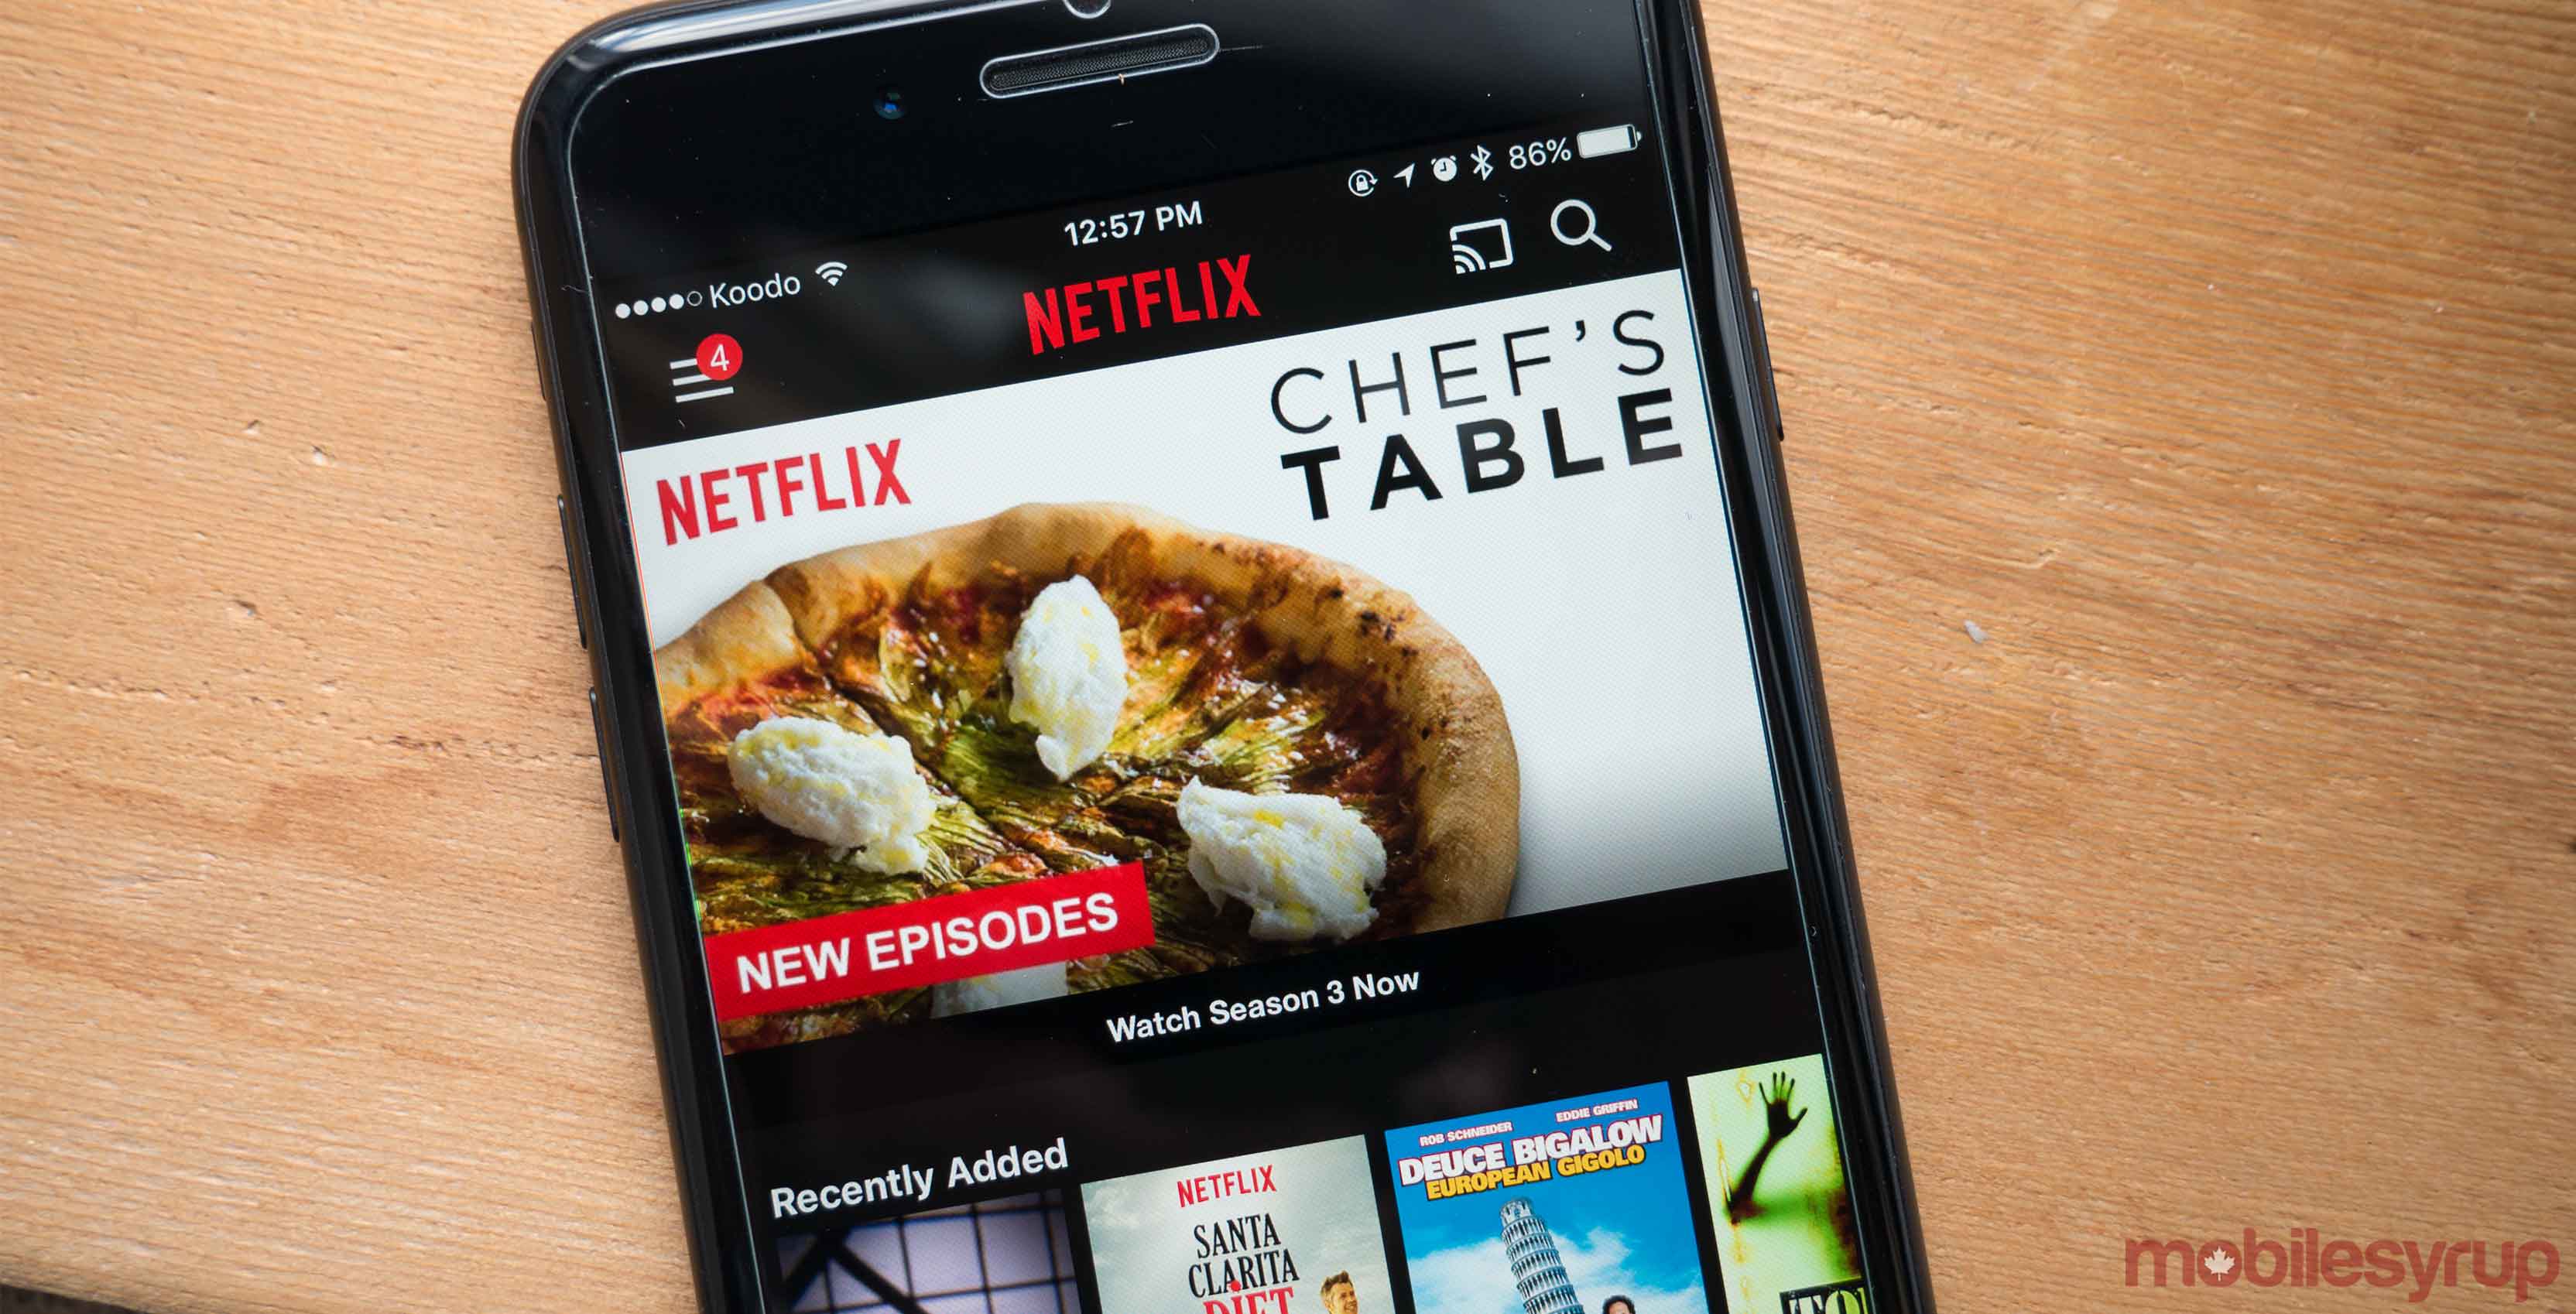 Netflix on phone - Chef's Table